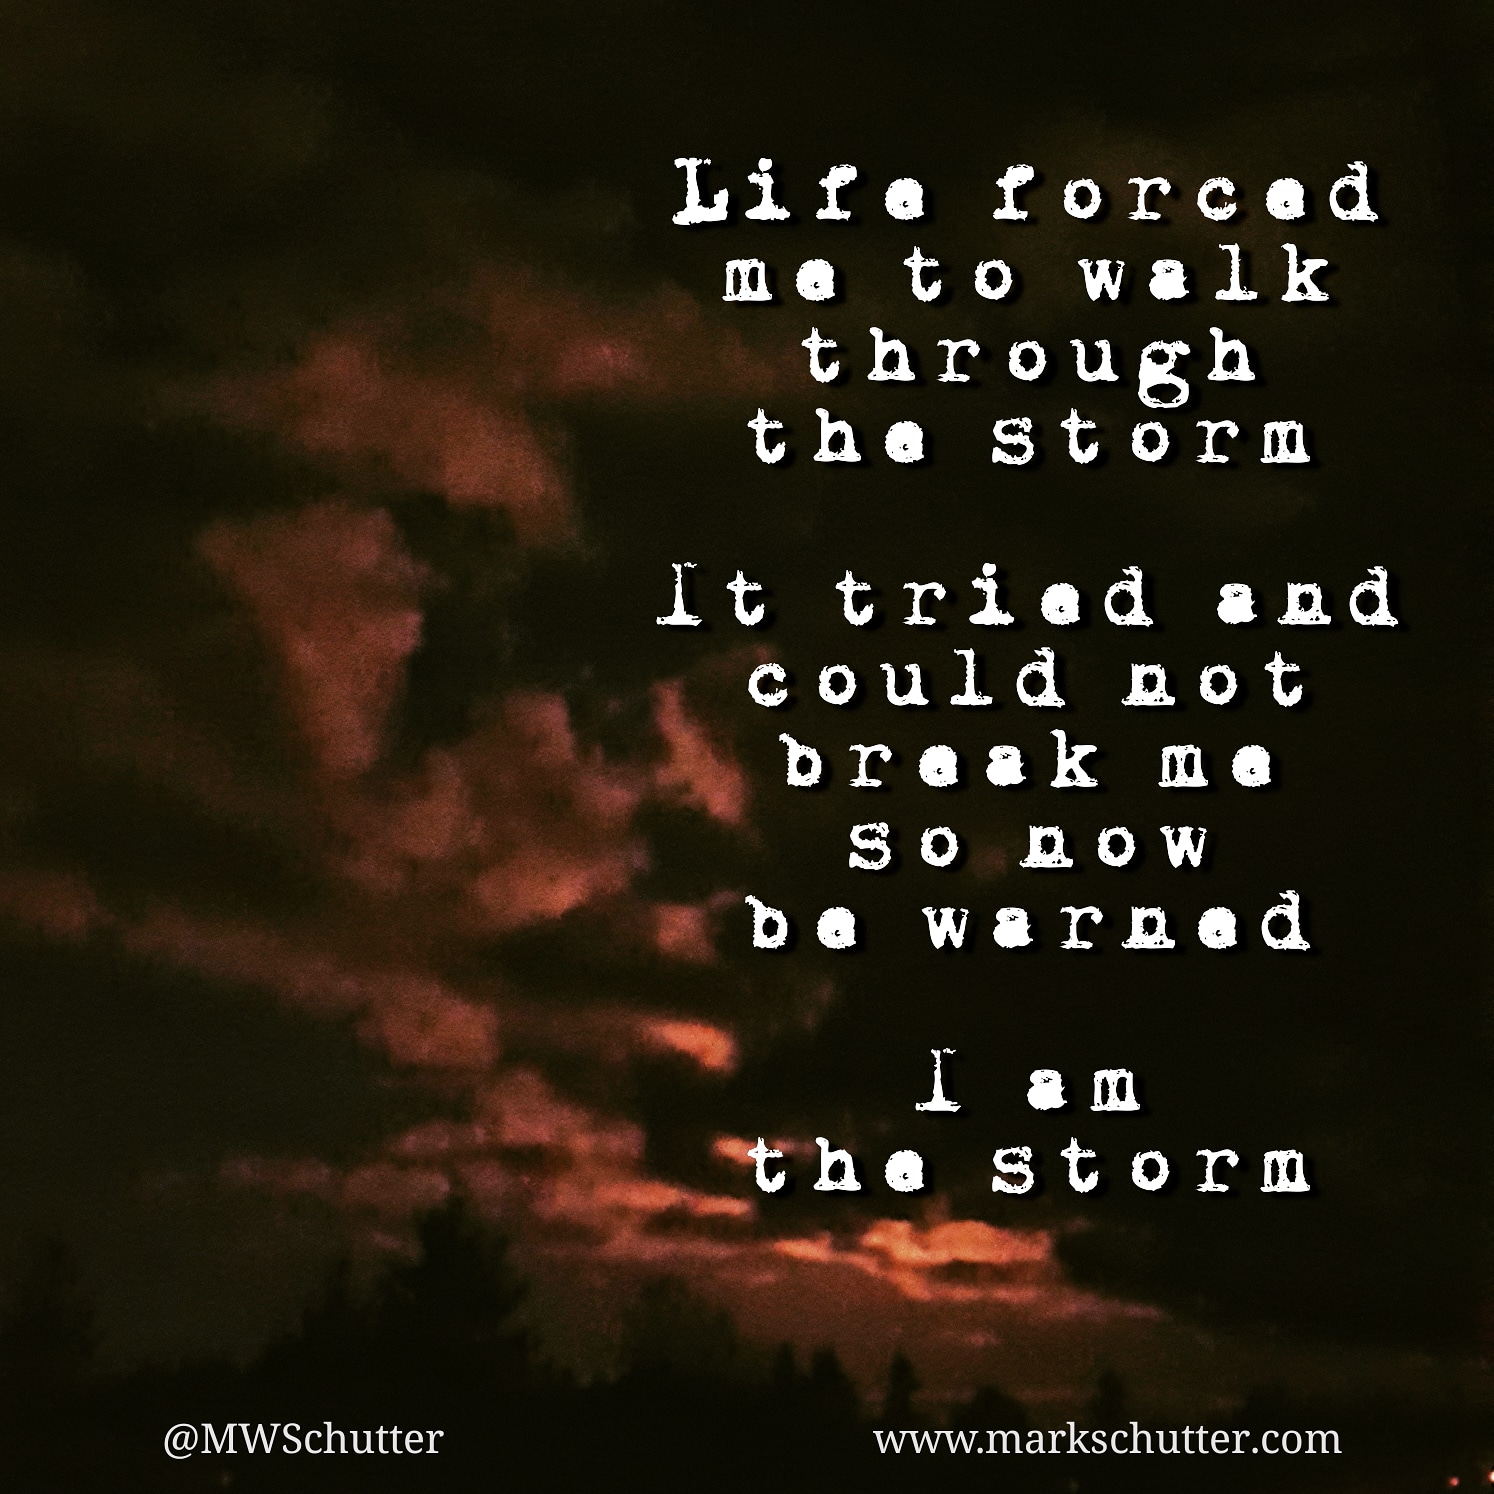 Have You Become the Storm?